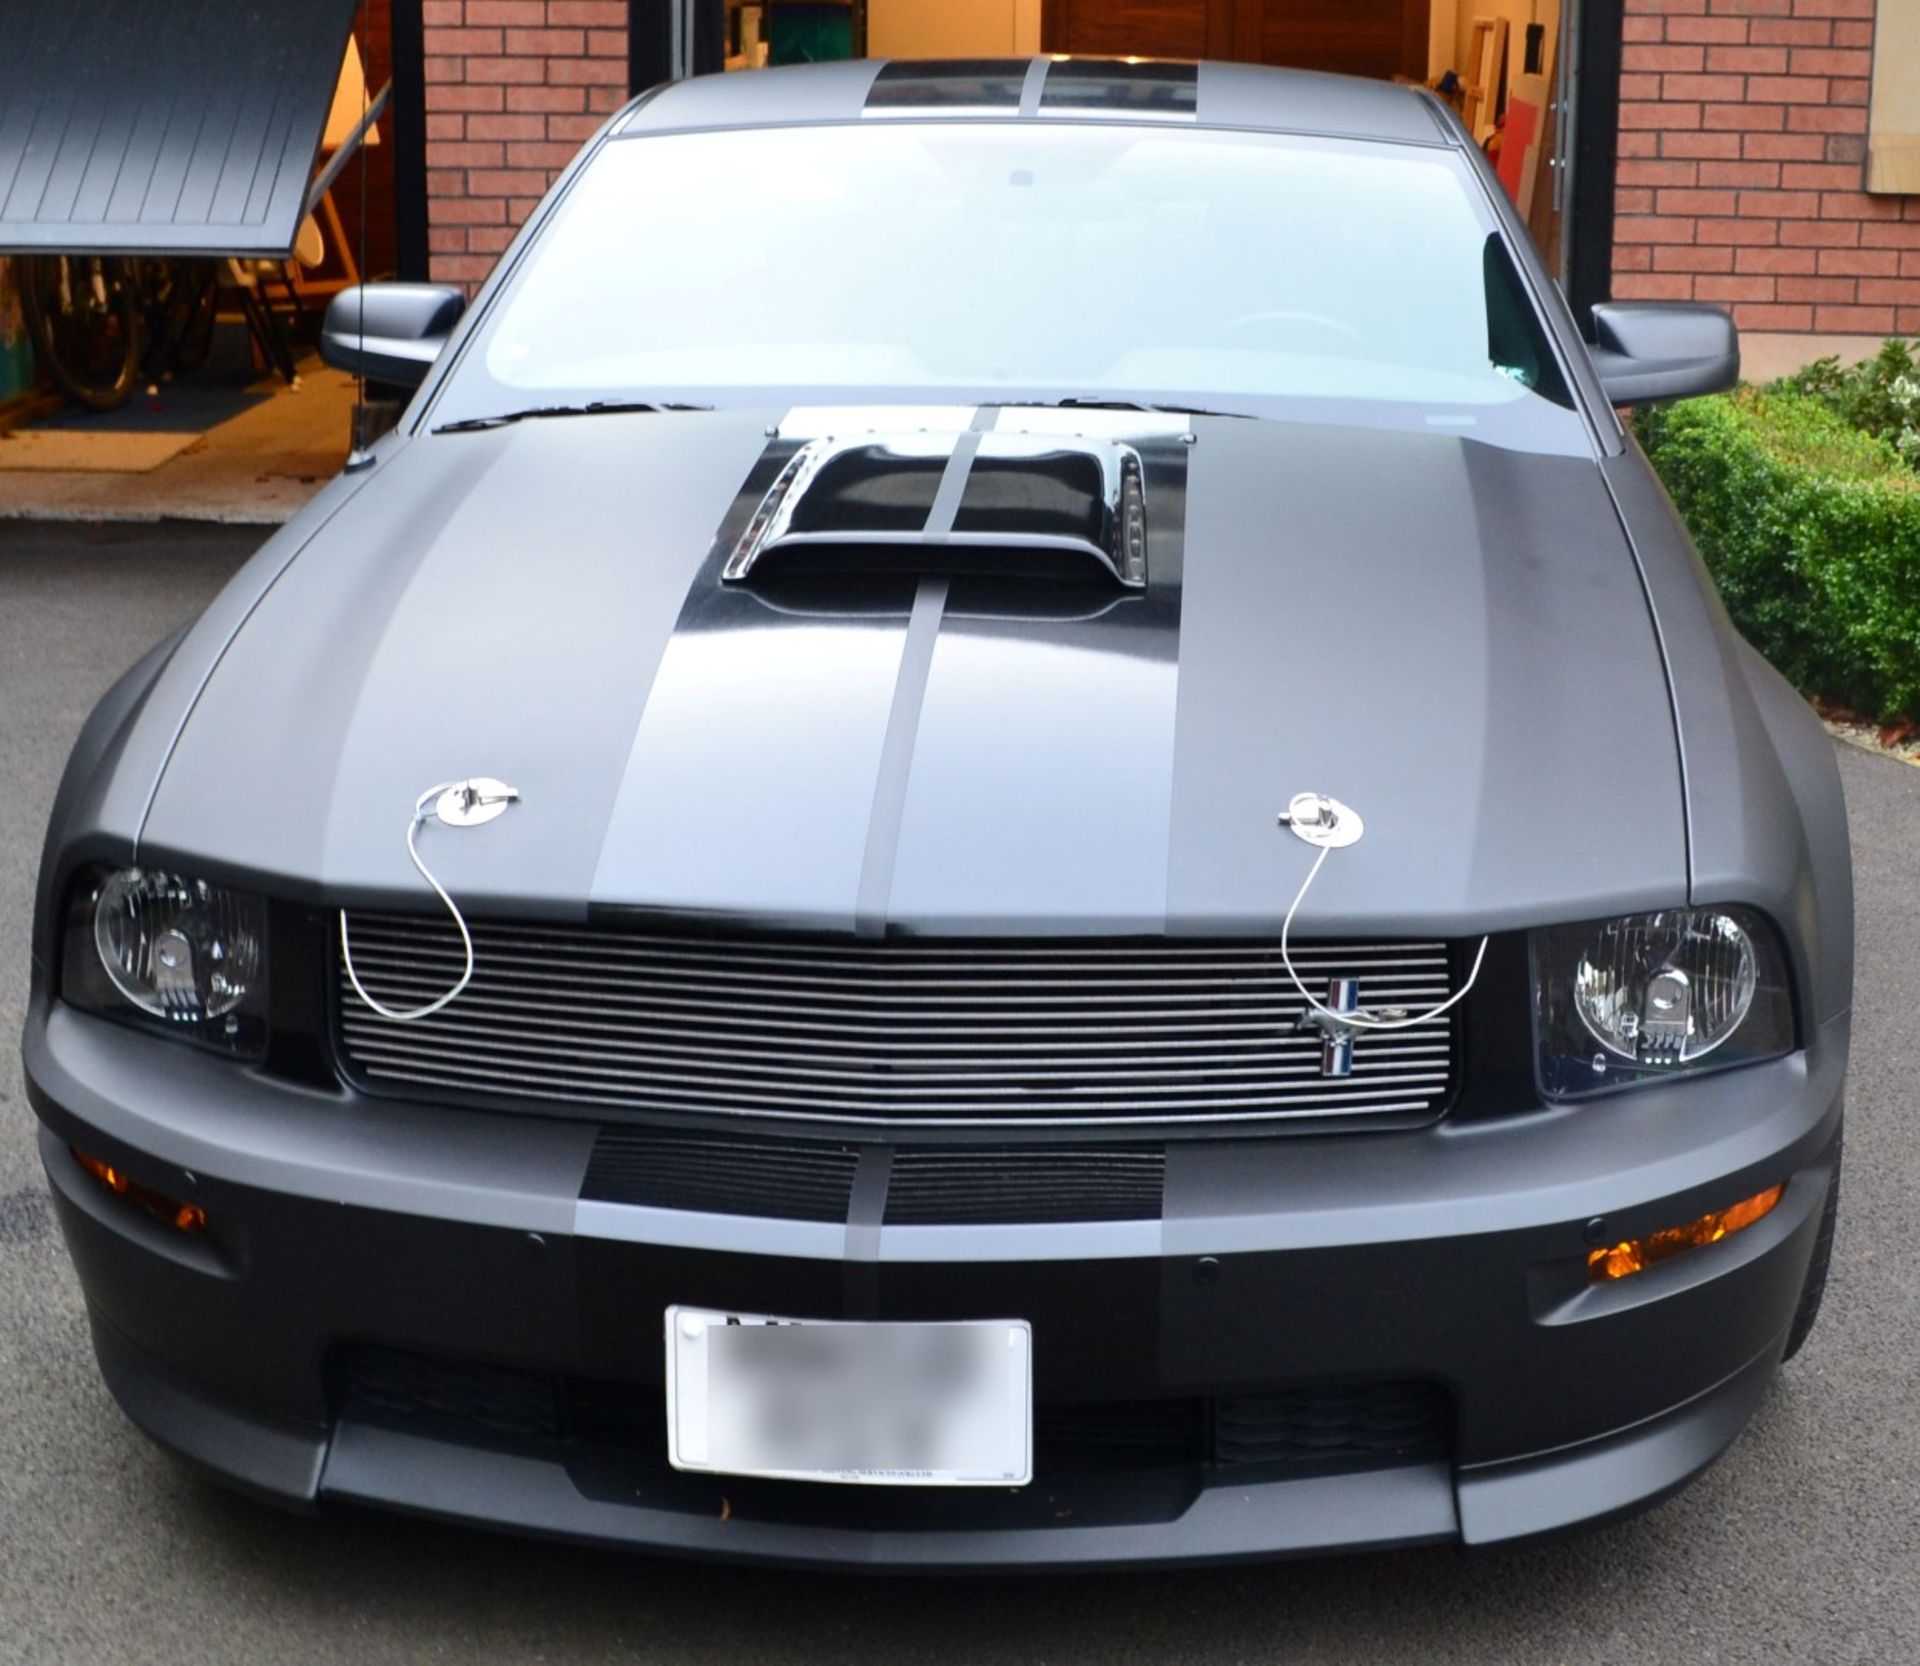 Limited Edition Supercharged 2008 Shelby Ford Mustang GT-C - 2136 Miles - No VAT on the hammer - Image 2 of 64